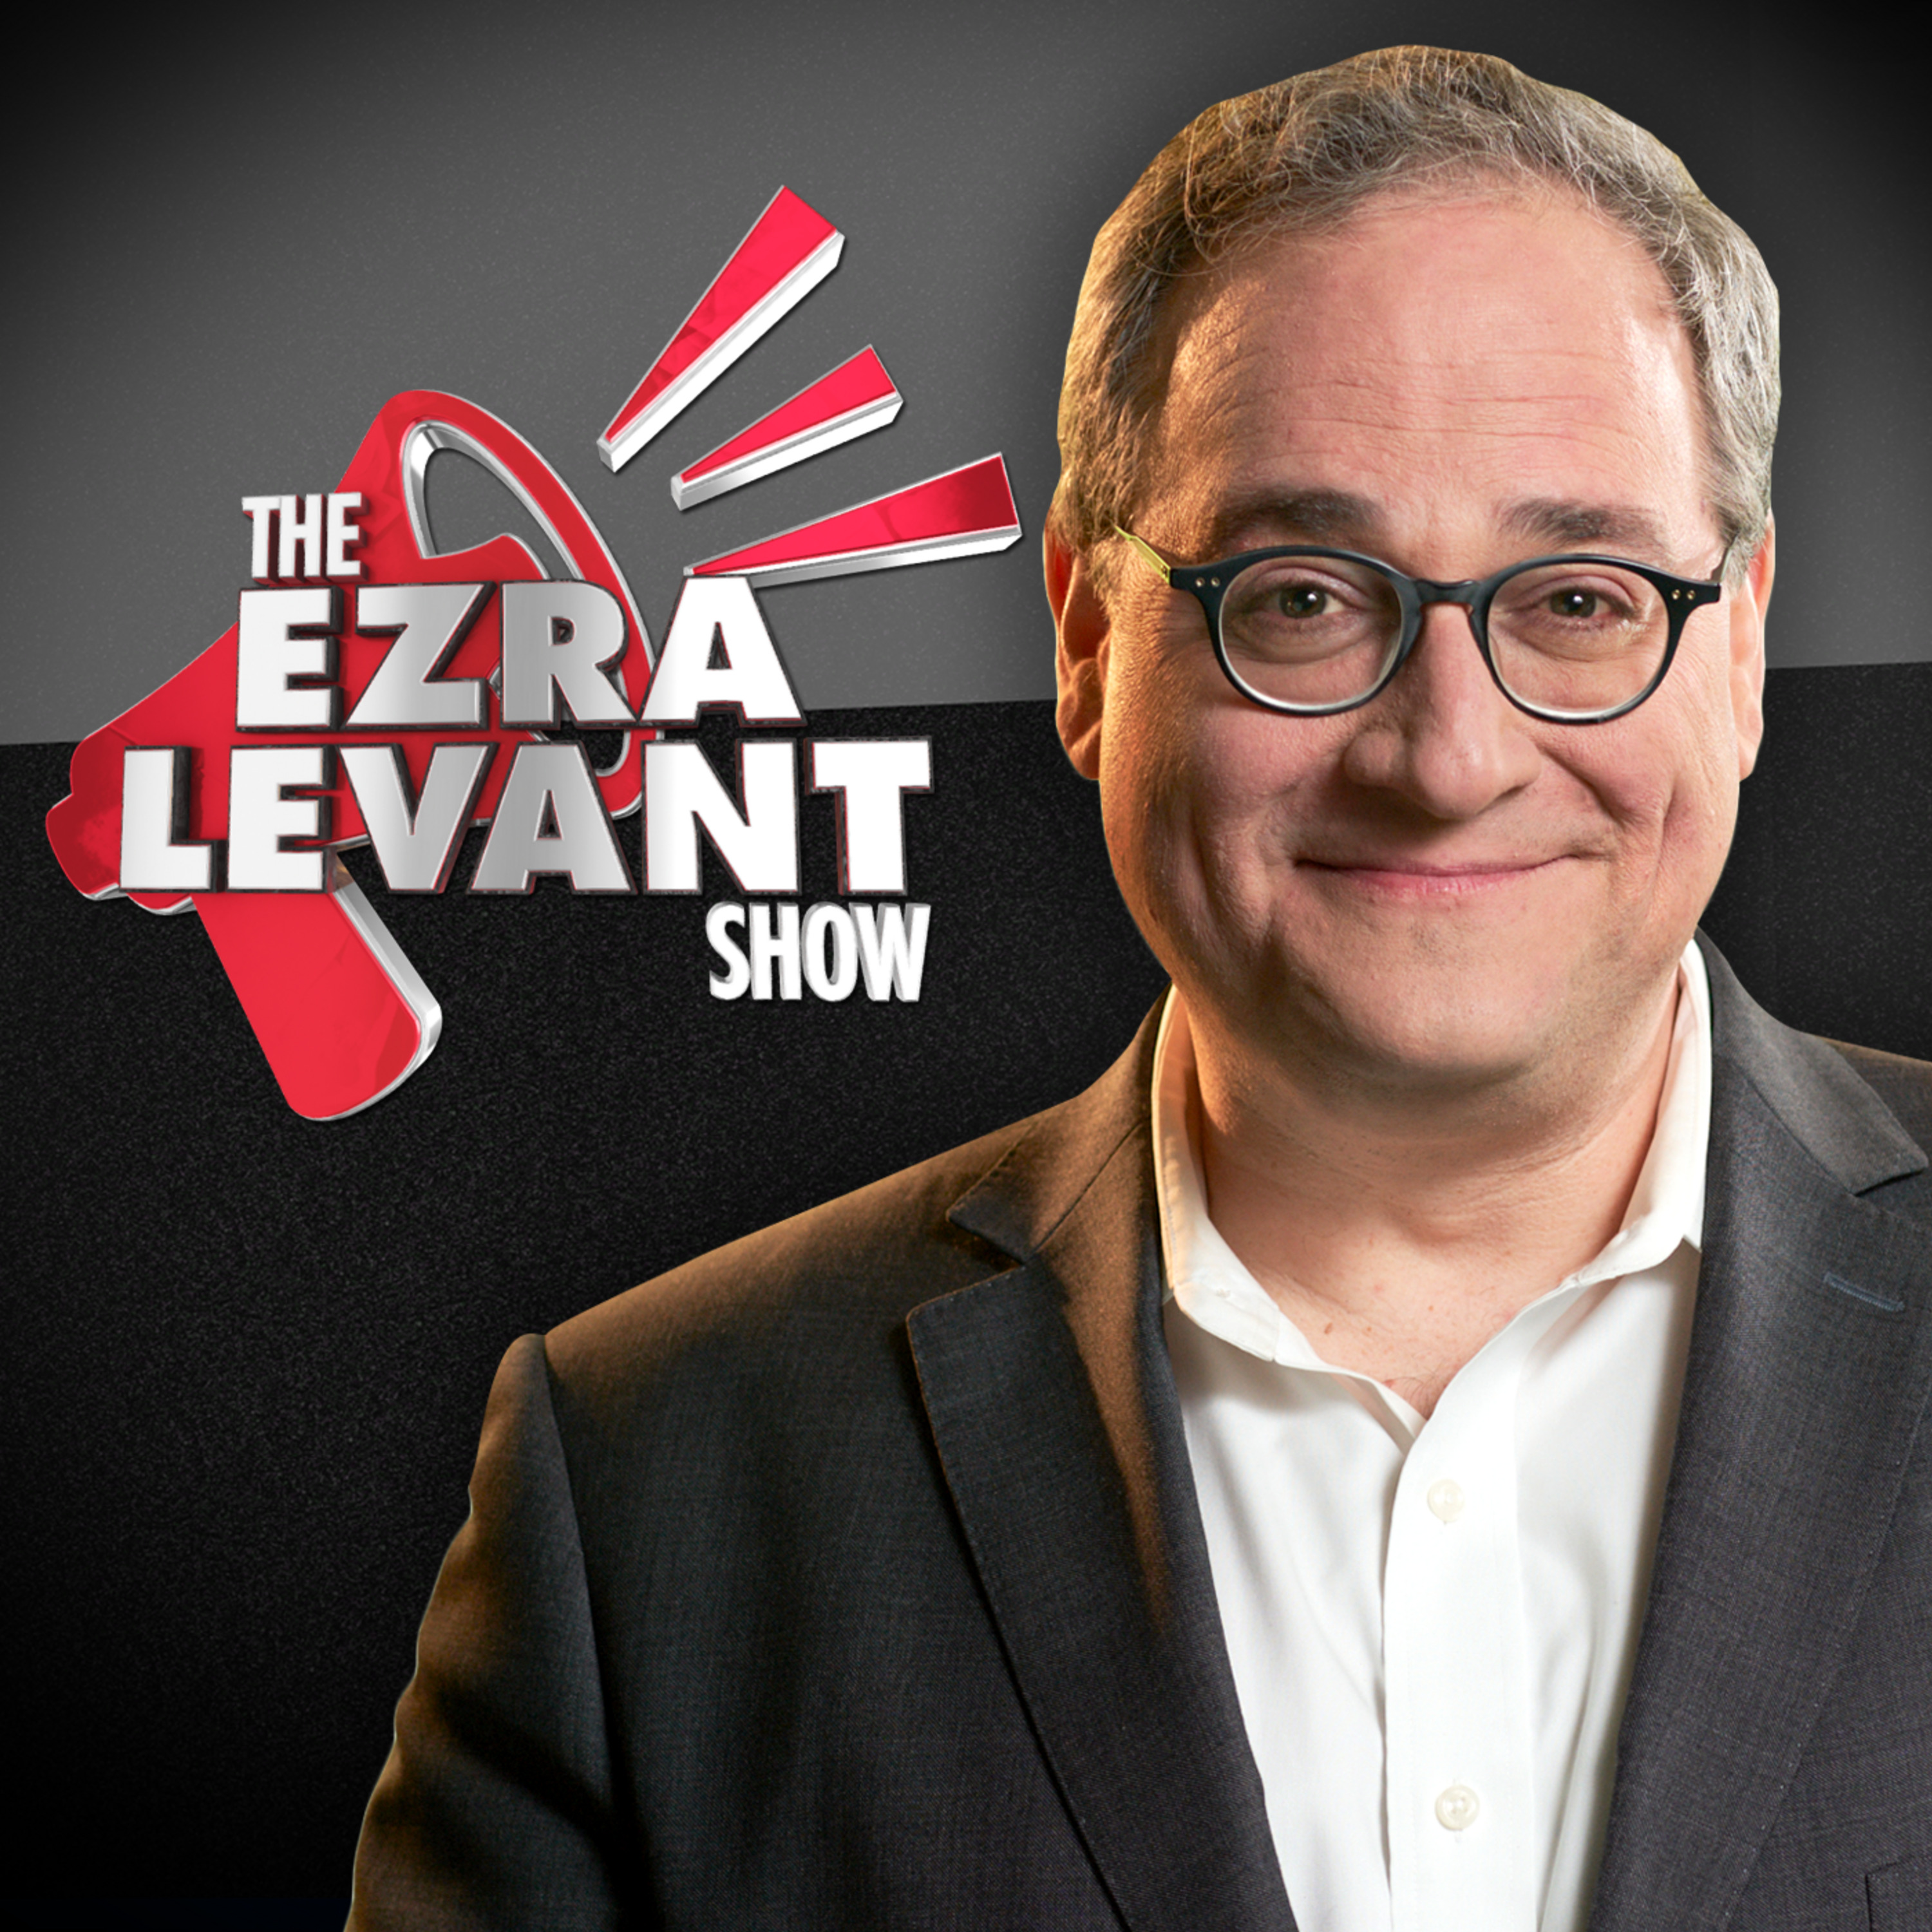 EZRA LEVANT | The Queen is dead. Long live the King! A one-on-one with Conrad Black